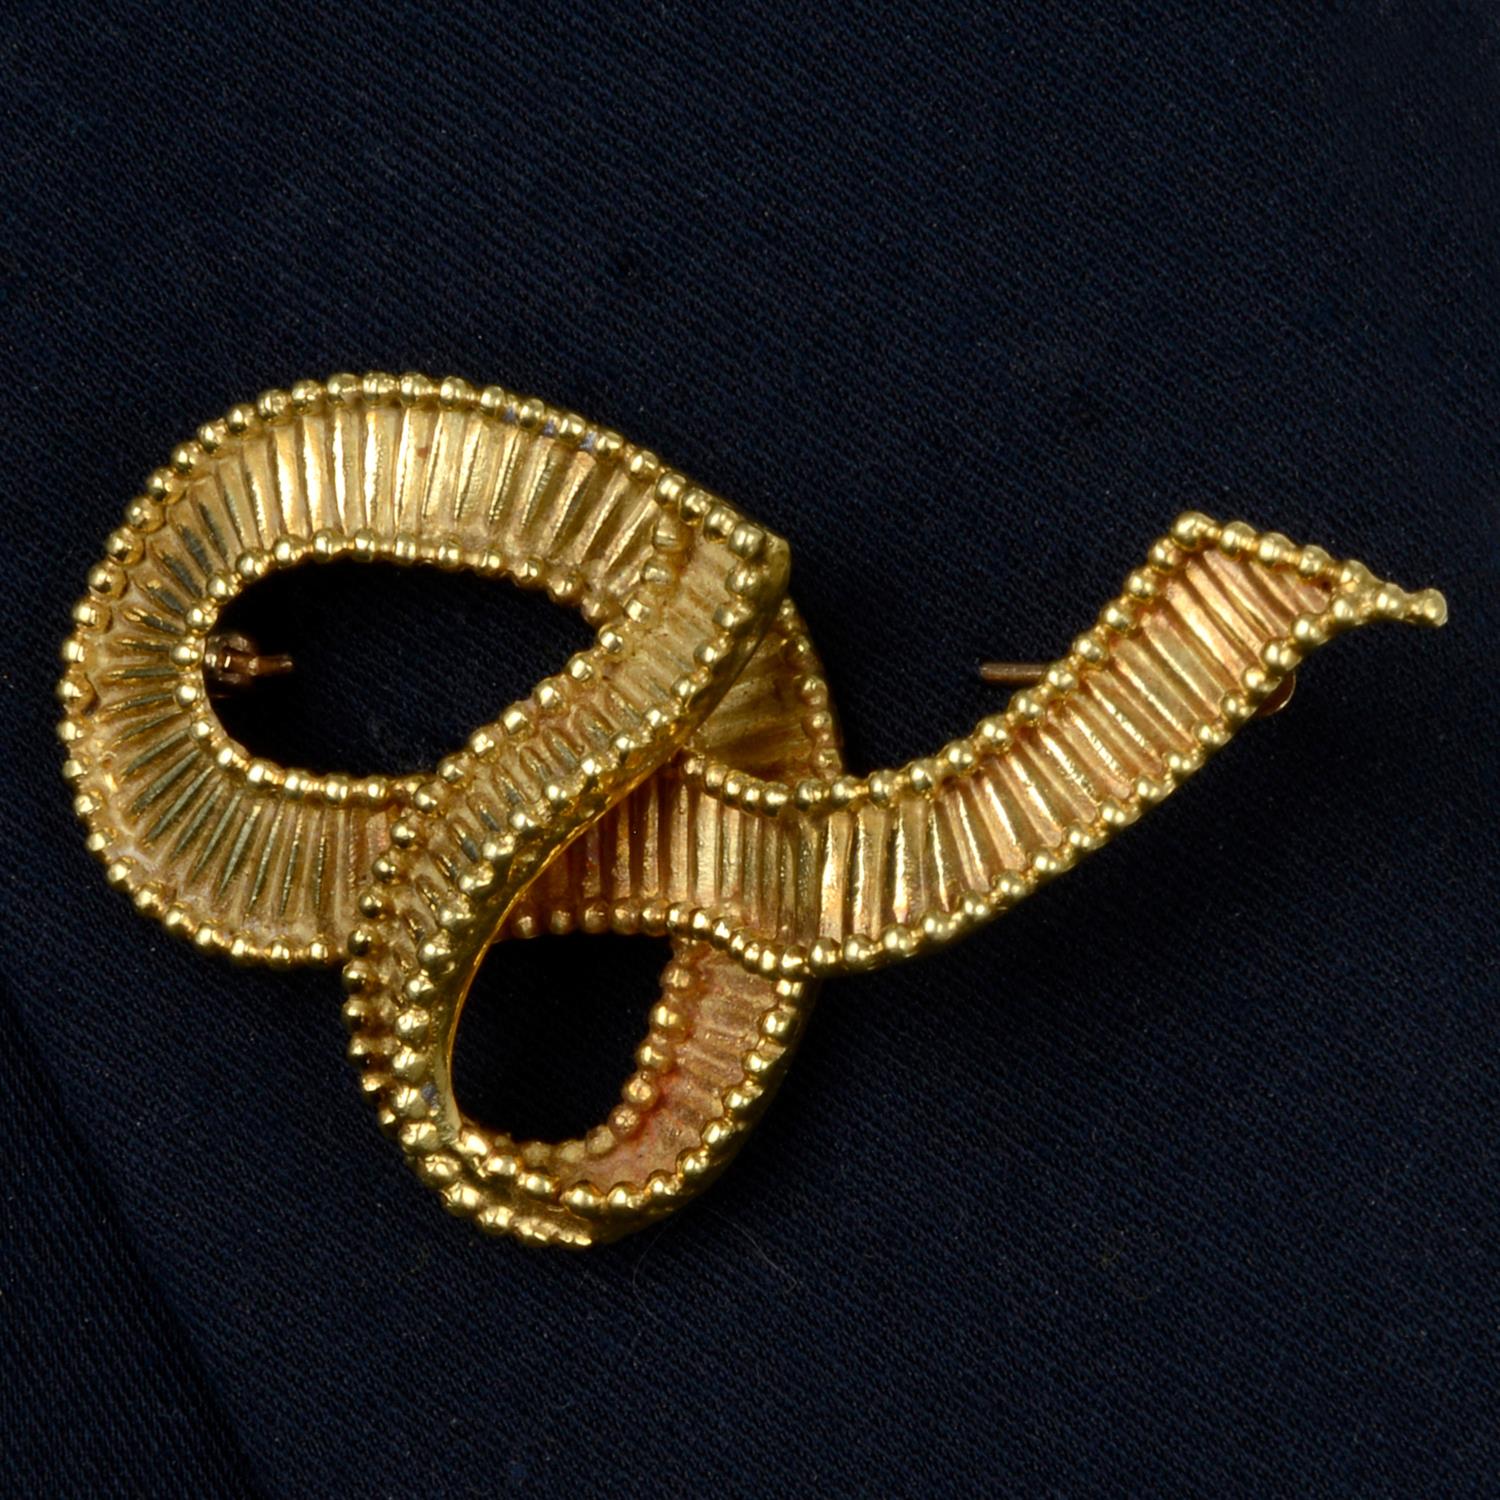 Mid 20th century 18ct gold brooch, by Cartier